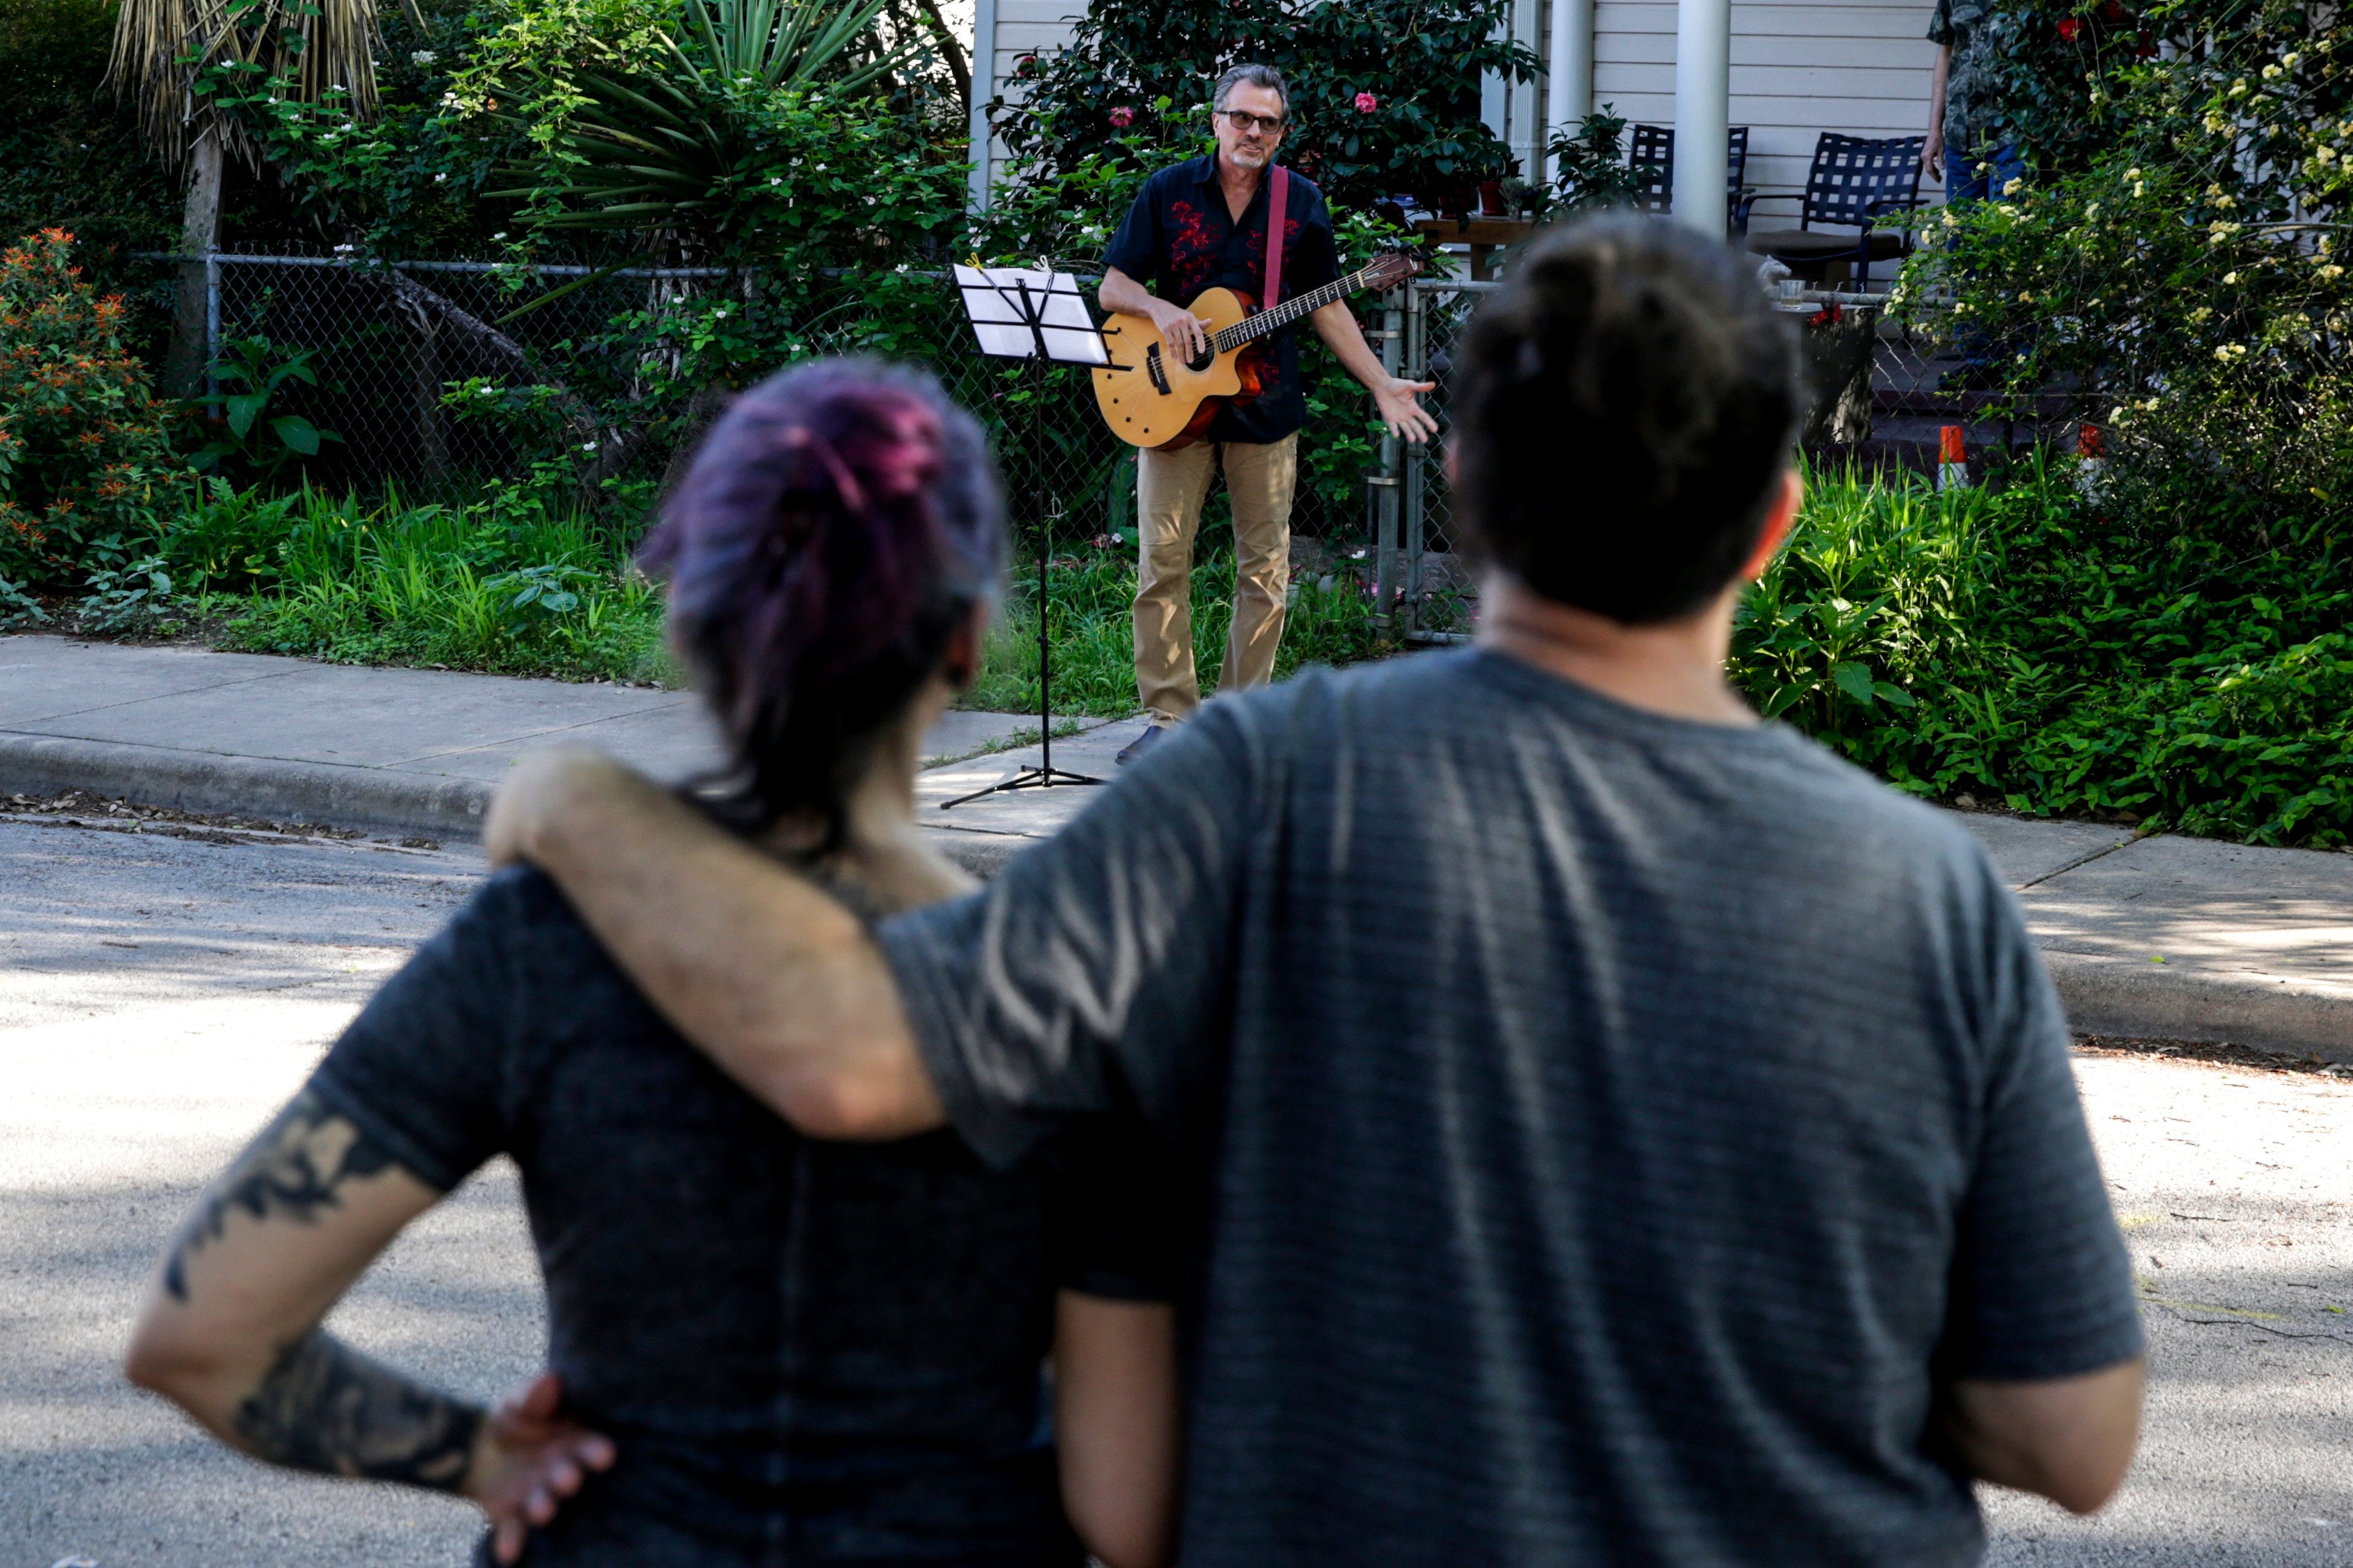 Guitarist David Kendall sings "Don't Stand So Close To Me" by The Police with his neighbors in a neighborhood off East Cesar Chavez in Austin on Tuesday, March 24, 2020. Kendall along with a few other neighbors started the neighborhood singalong in order to lift spirits during the city's response to the known coronavirus.